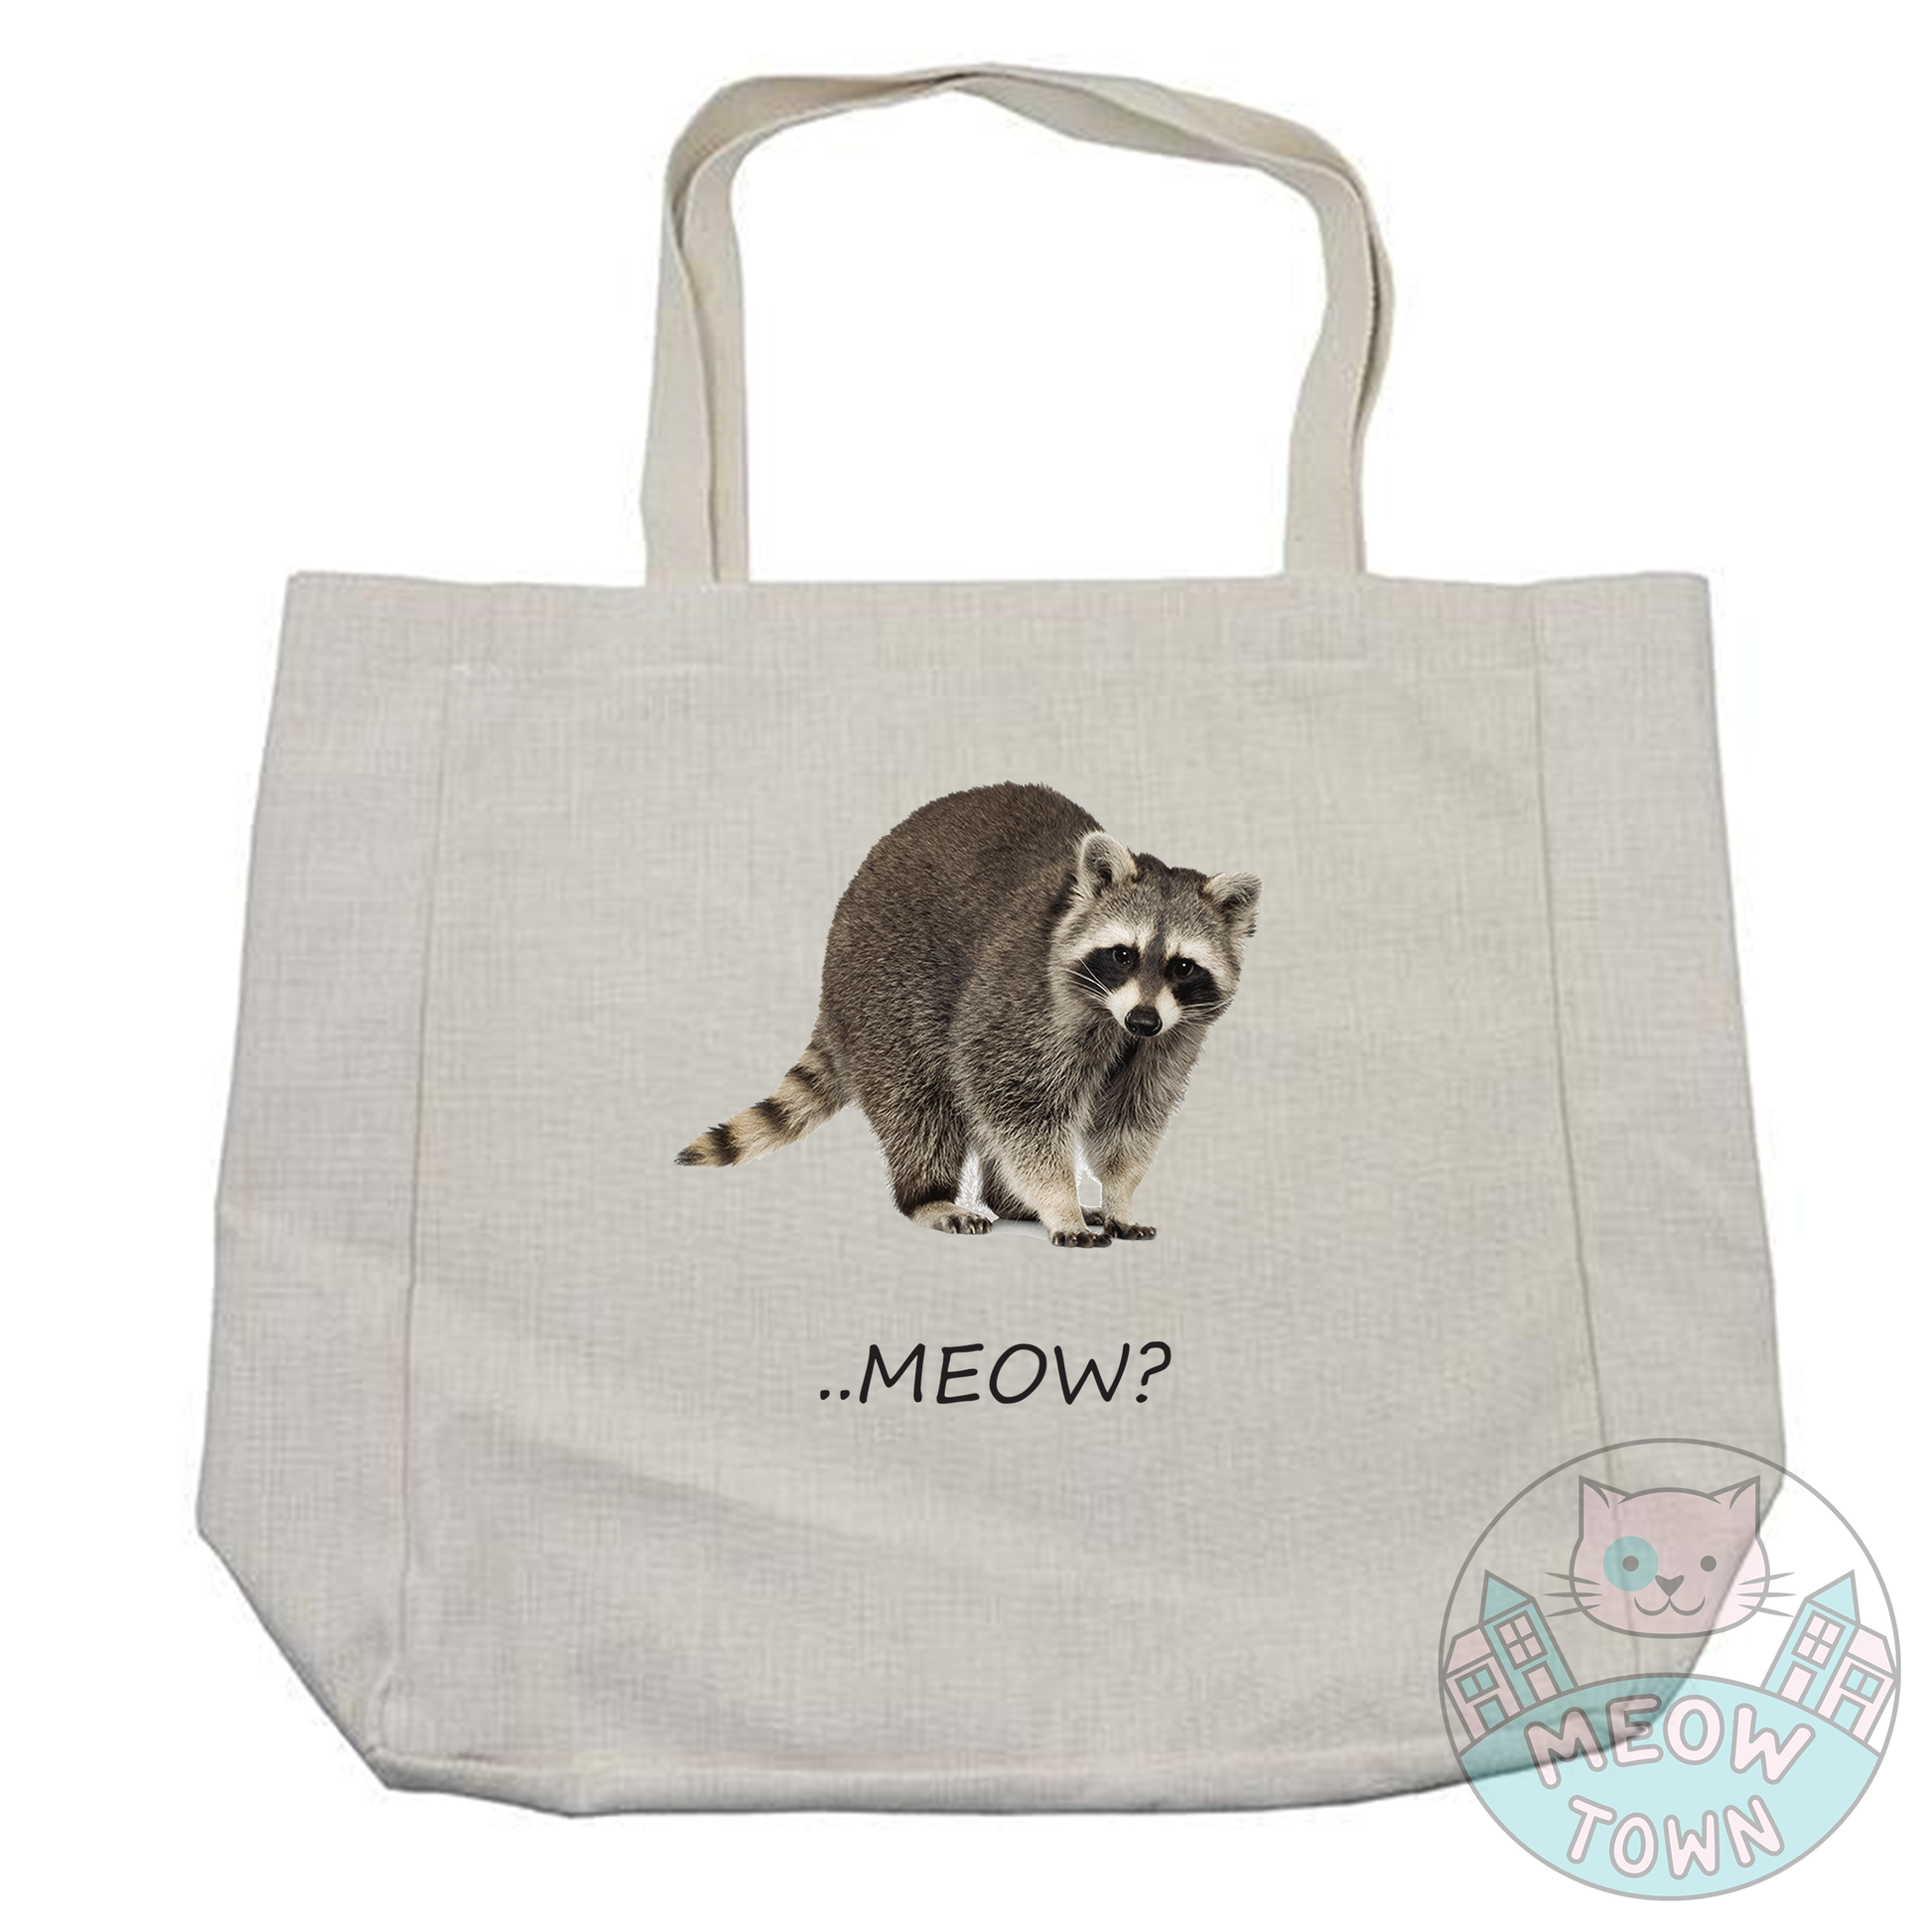 Funny and handy linen touch tote bag printed in the UK by us at Meow Town exclusively for You. 'Meow?’ slogan with a funny raccoon print. Natural beige bag colour. Durable single layer material. Polyester and cotton fabric, linen effect.  Choose from 3 bag types: Classic tote, Large tote or drawstring backpack.